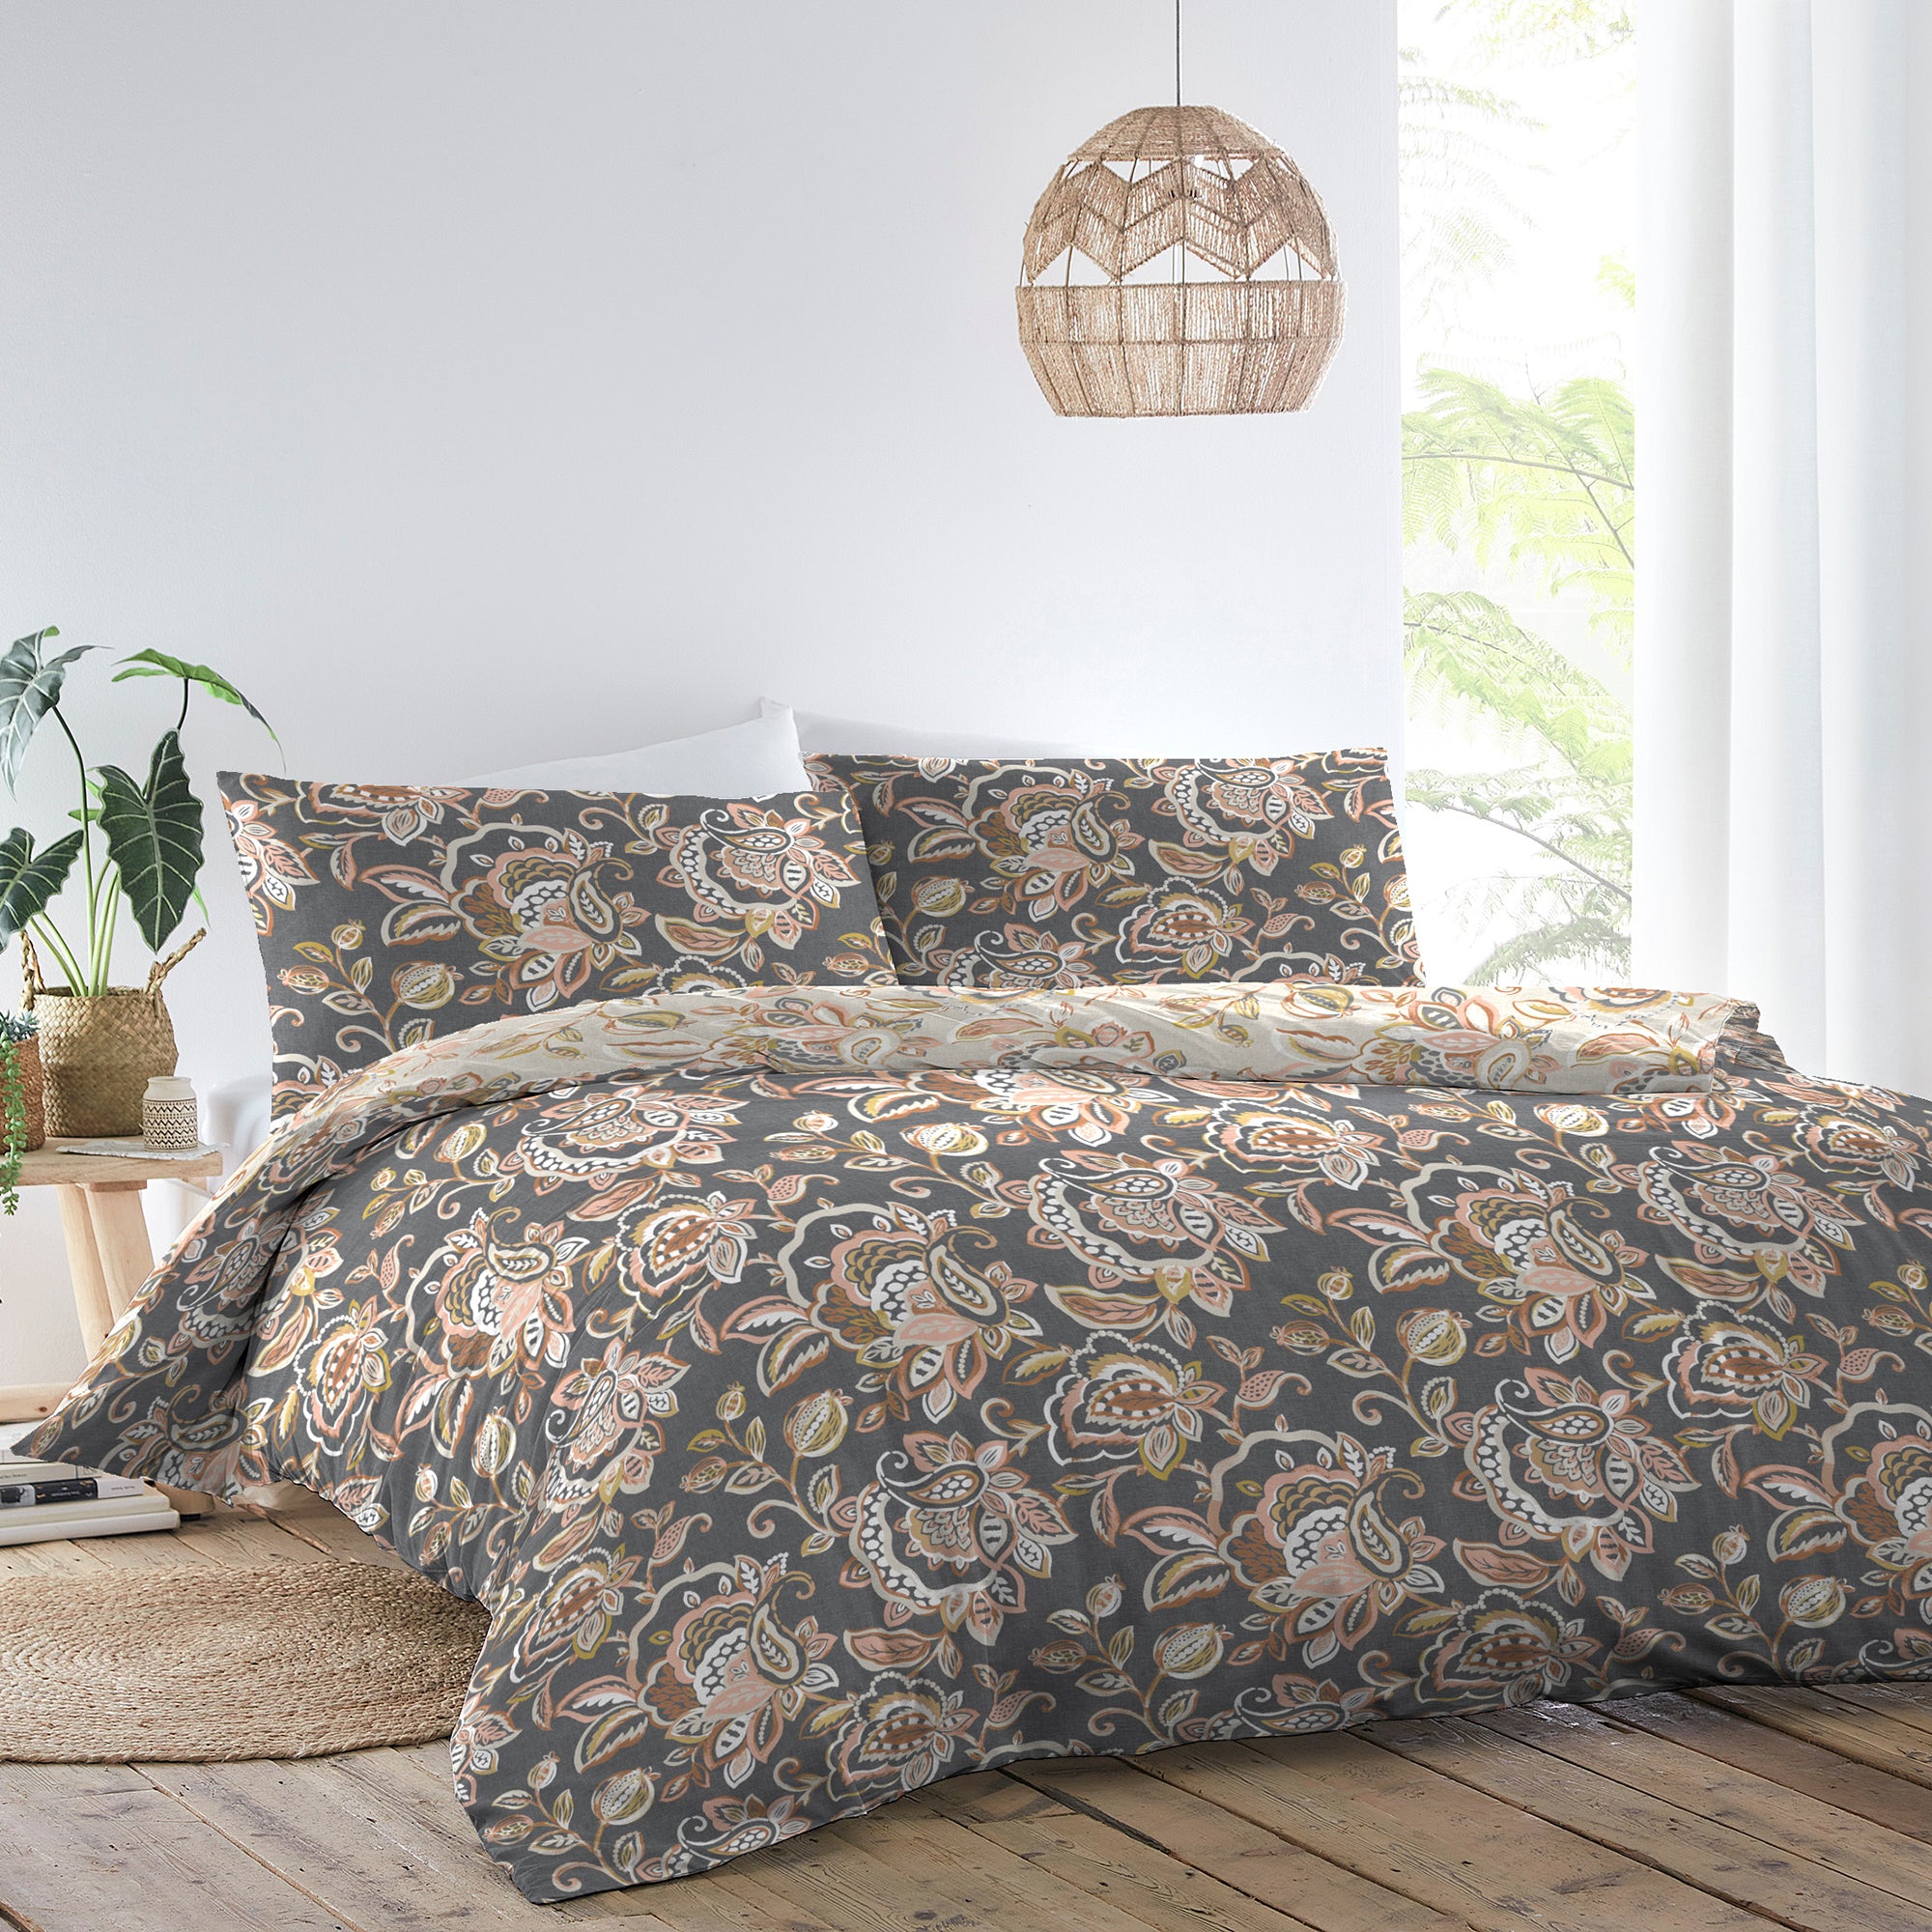 Duvet Cover Set Marisol by Appletree Promo in Charcoal